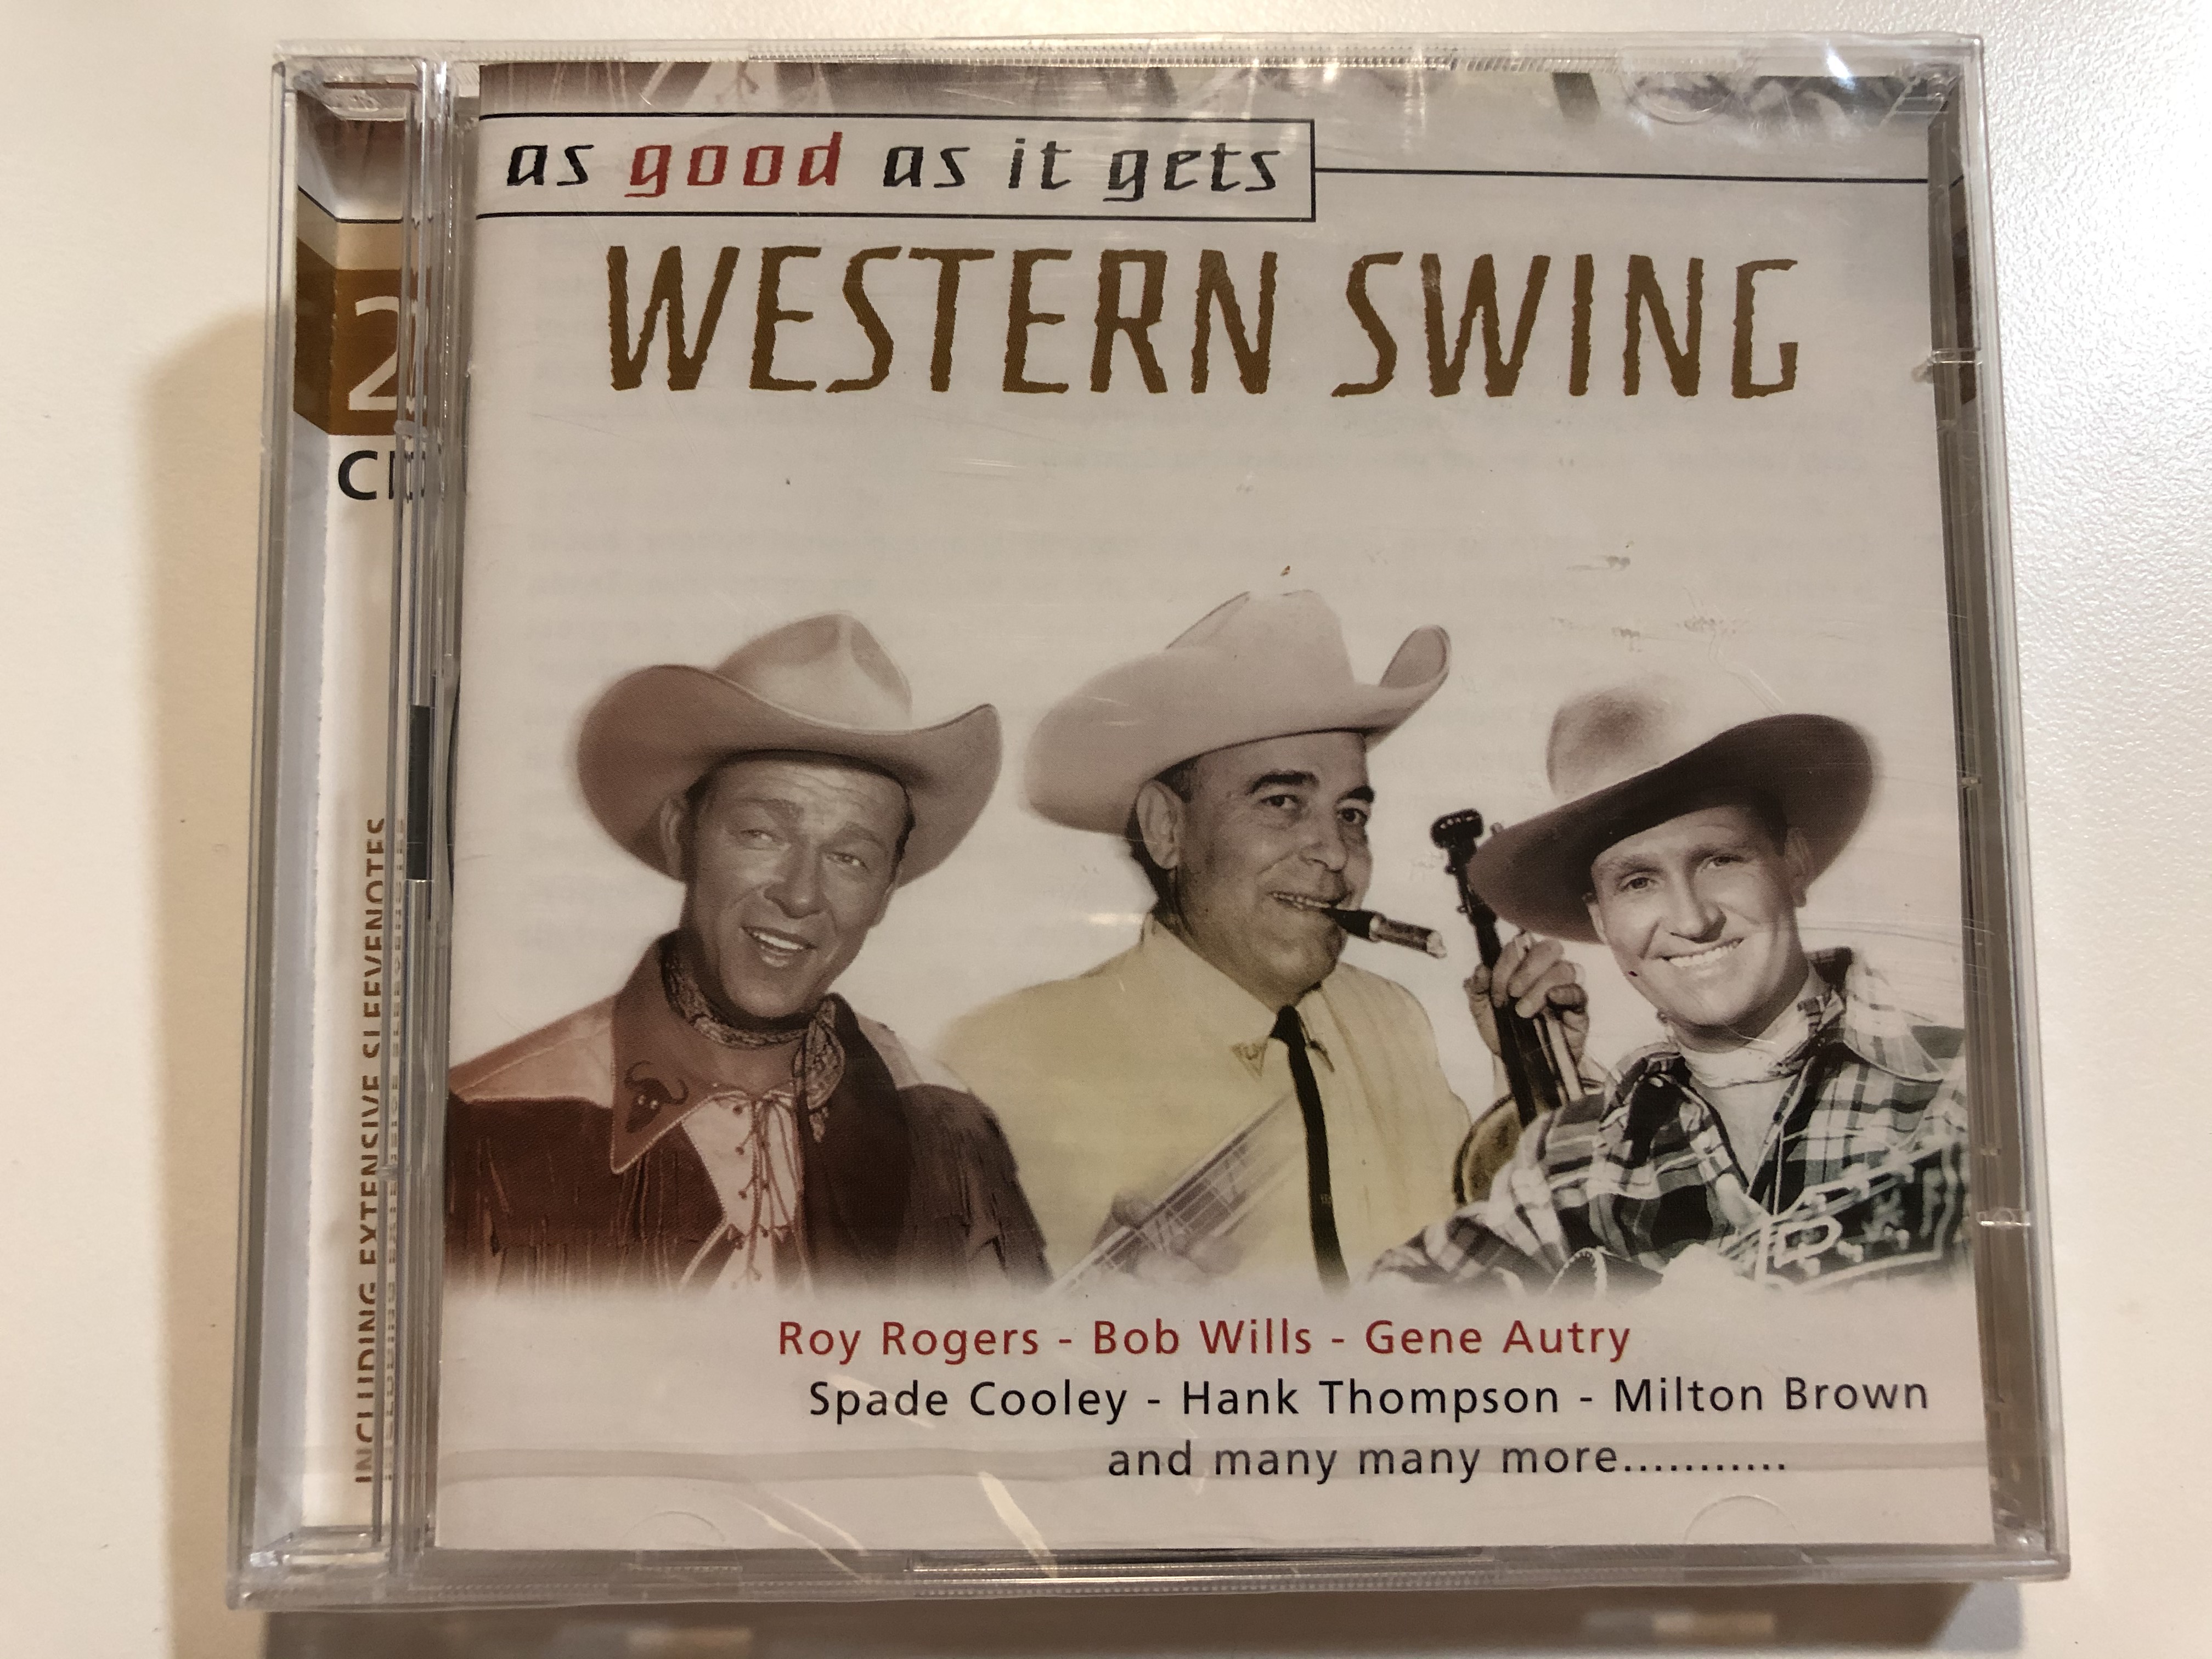 as-good-as-it-gets-western-swing-roy-rogers-bob-wills-gene-autry-spade-cooley-hank-thompson-milton-brown-and-many-many-more...-disky-2x-audio-cd-2000-do-247362-1-.jpg